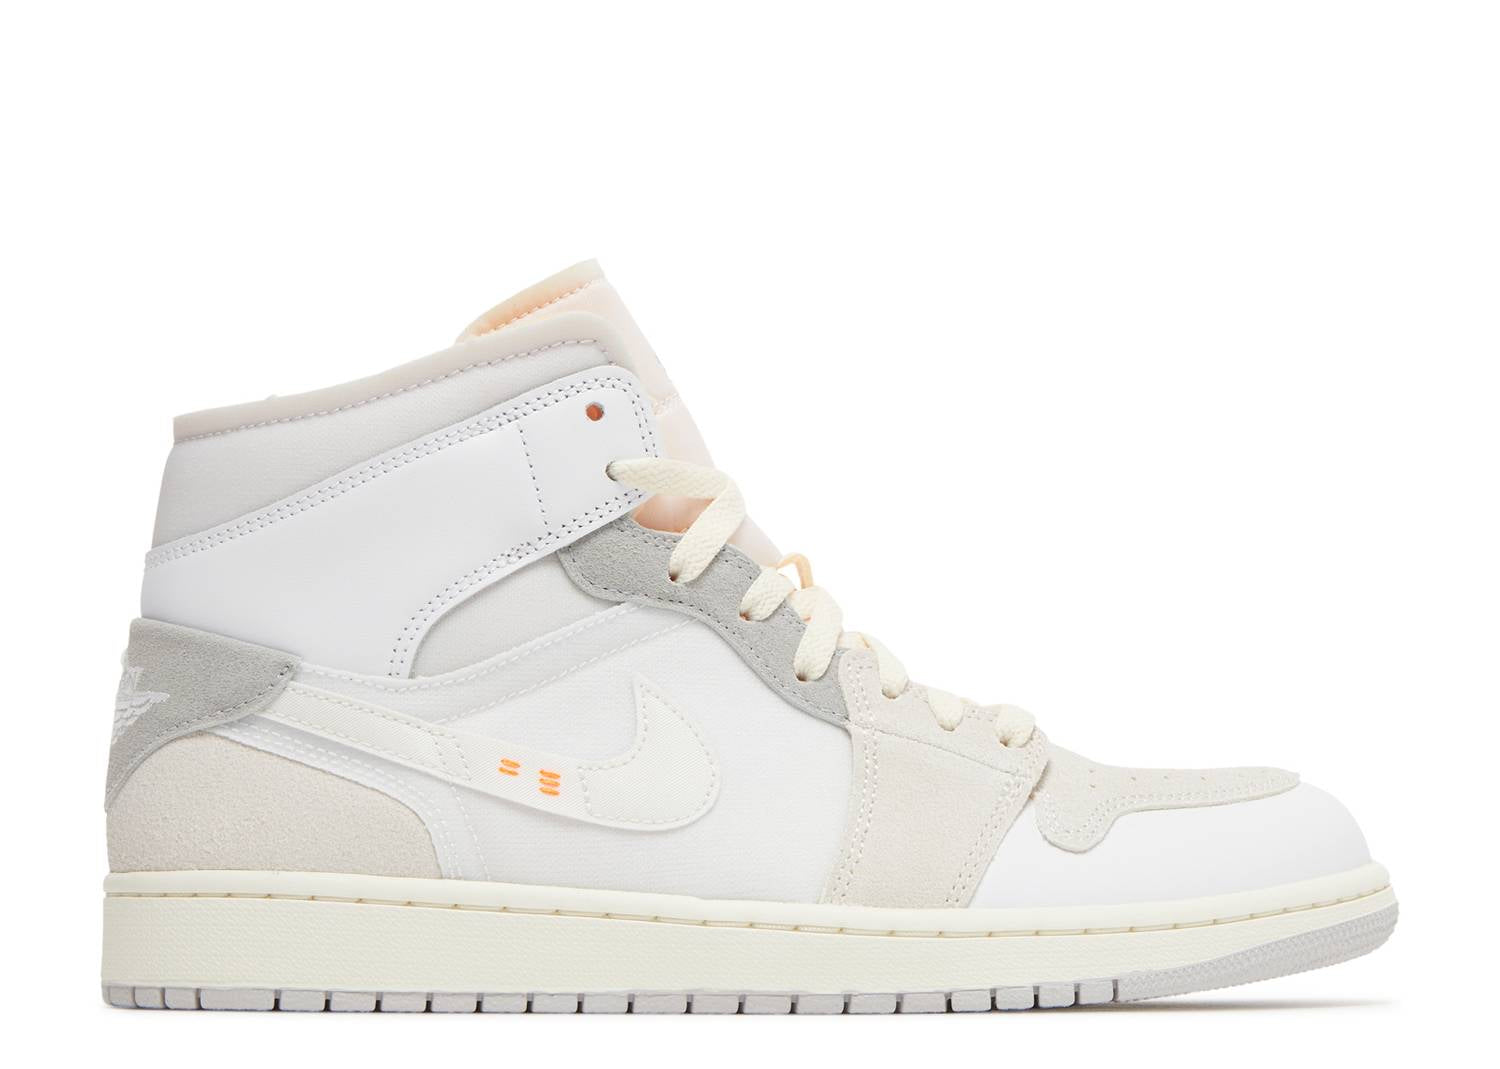 AIR JORDAN 1 MID “CRAFT INSIDE OUT WHITE GREY”